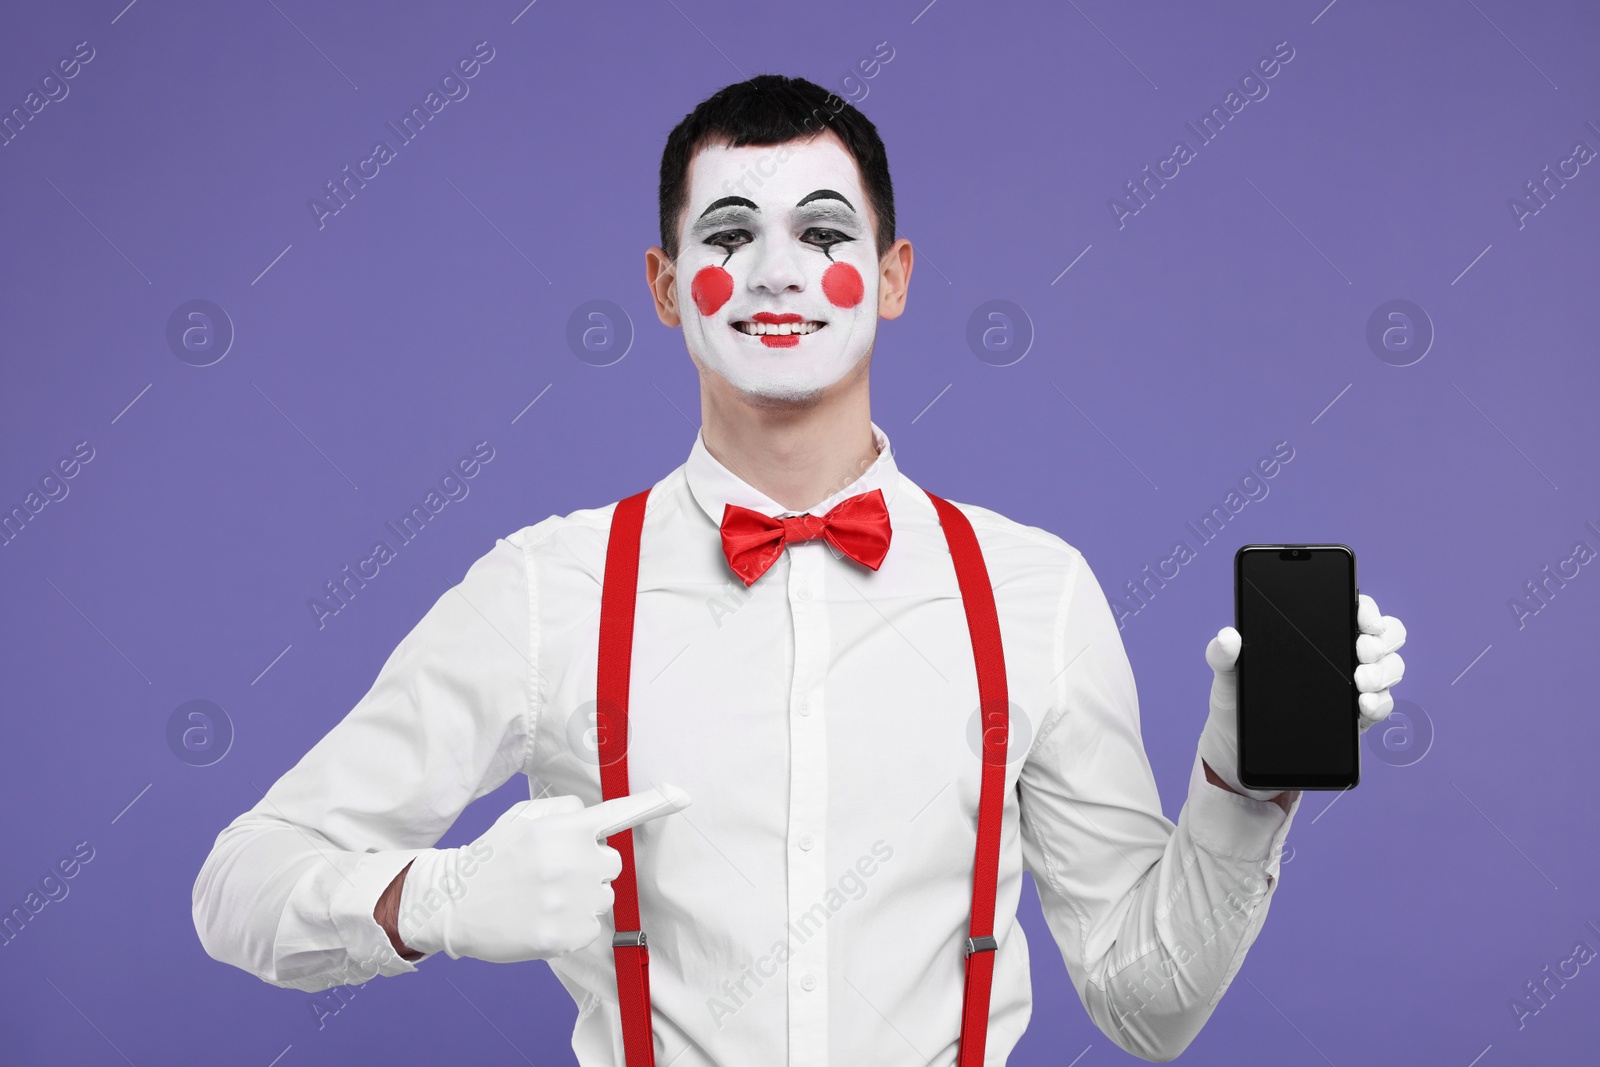 Photo of Funny mime artist pointing at smartphone on purple background